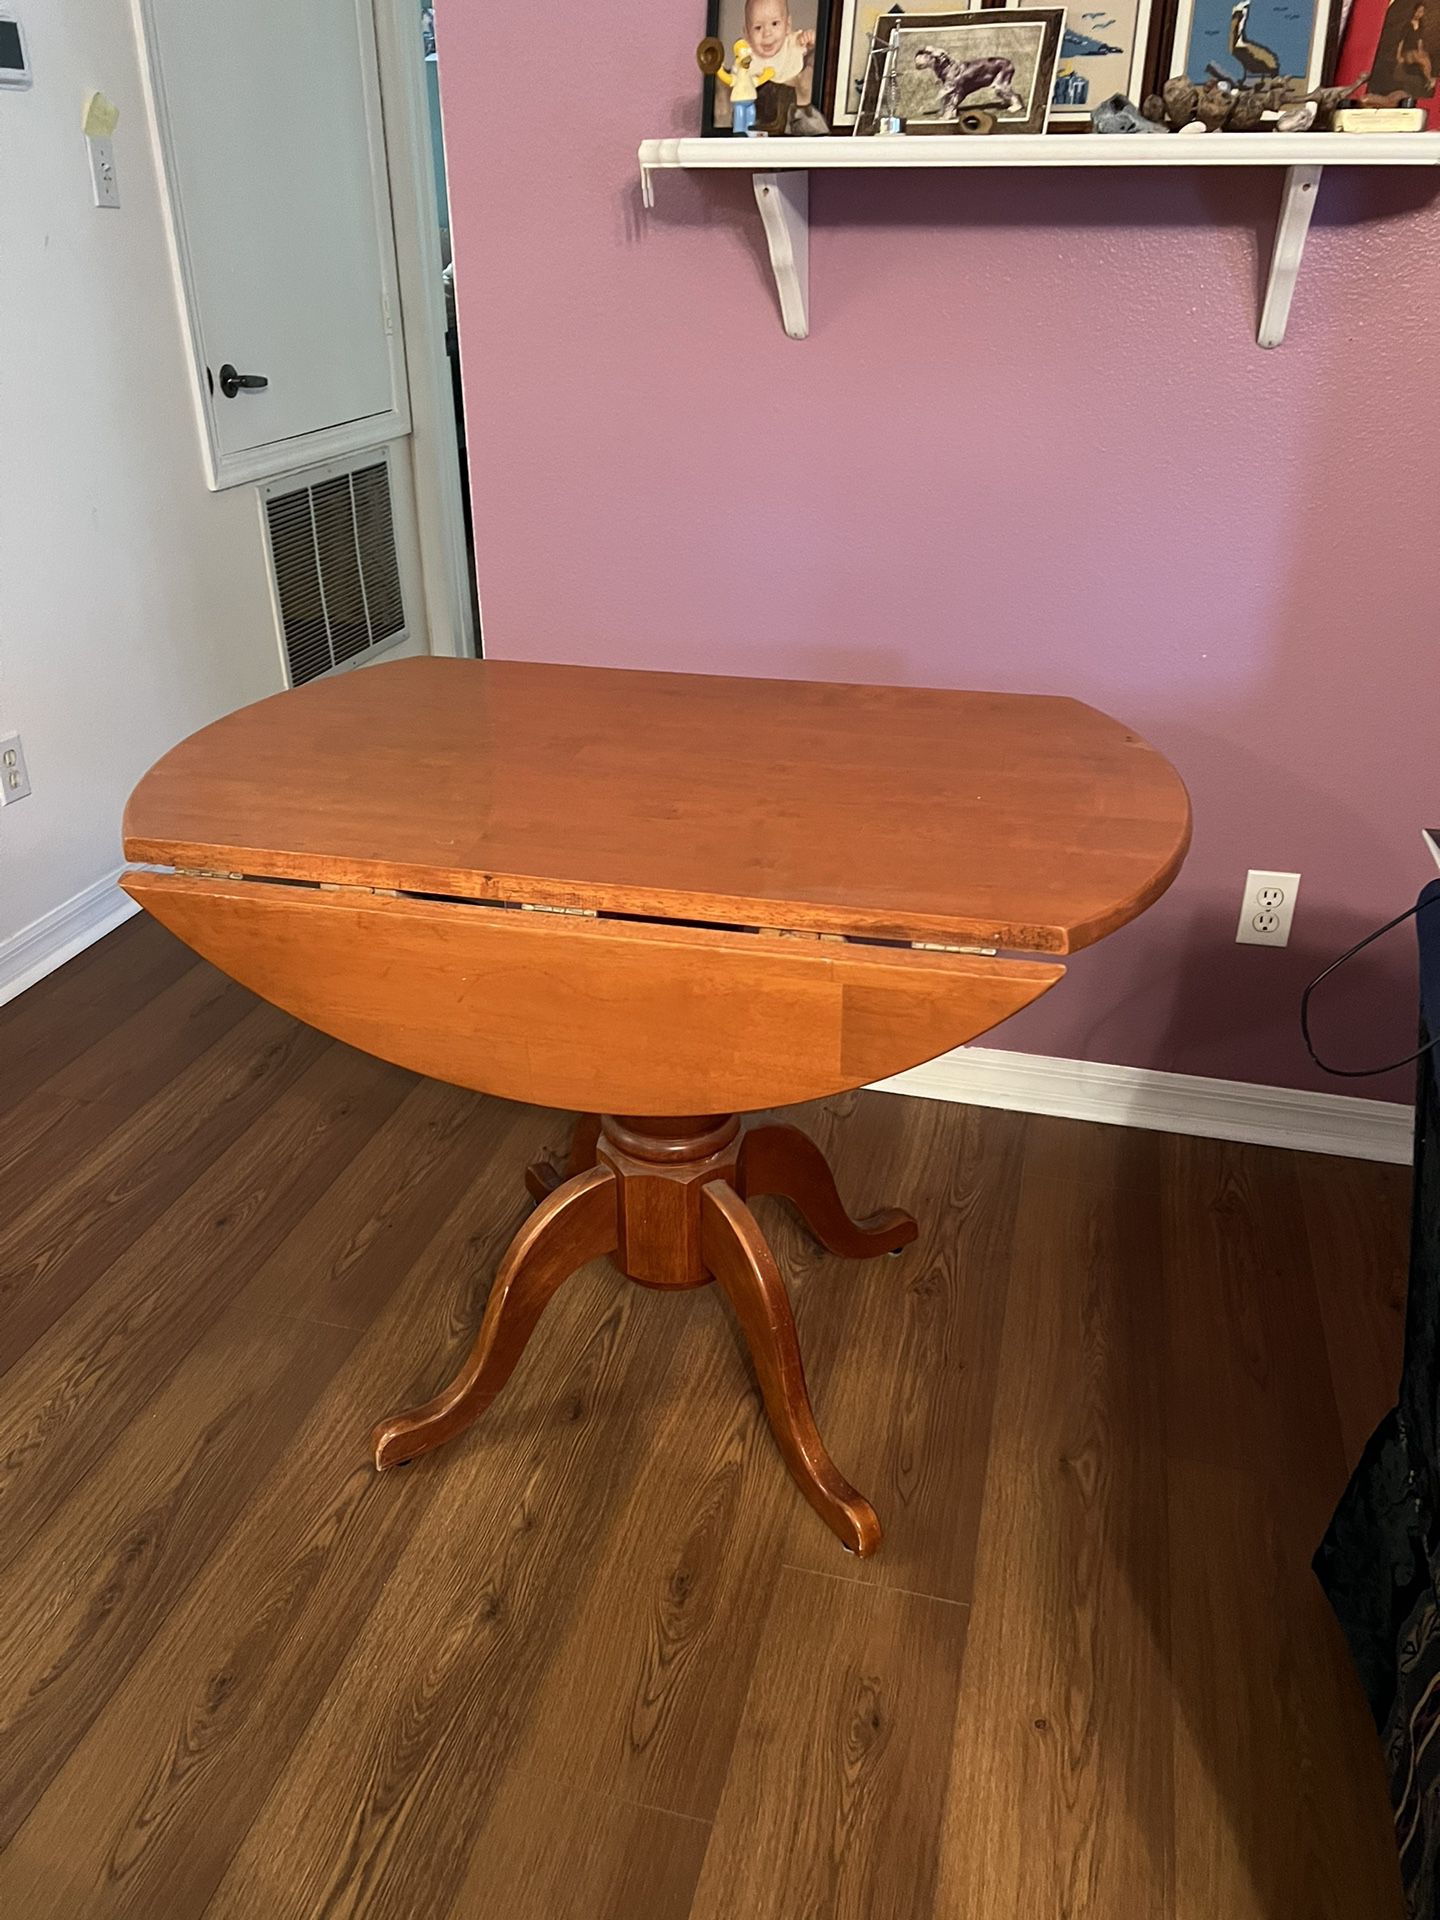 Refinished Drop Leaf Dining Table